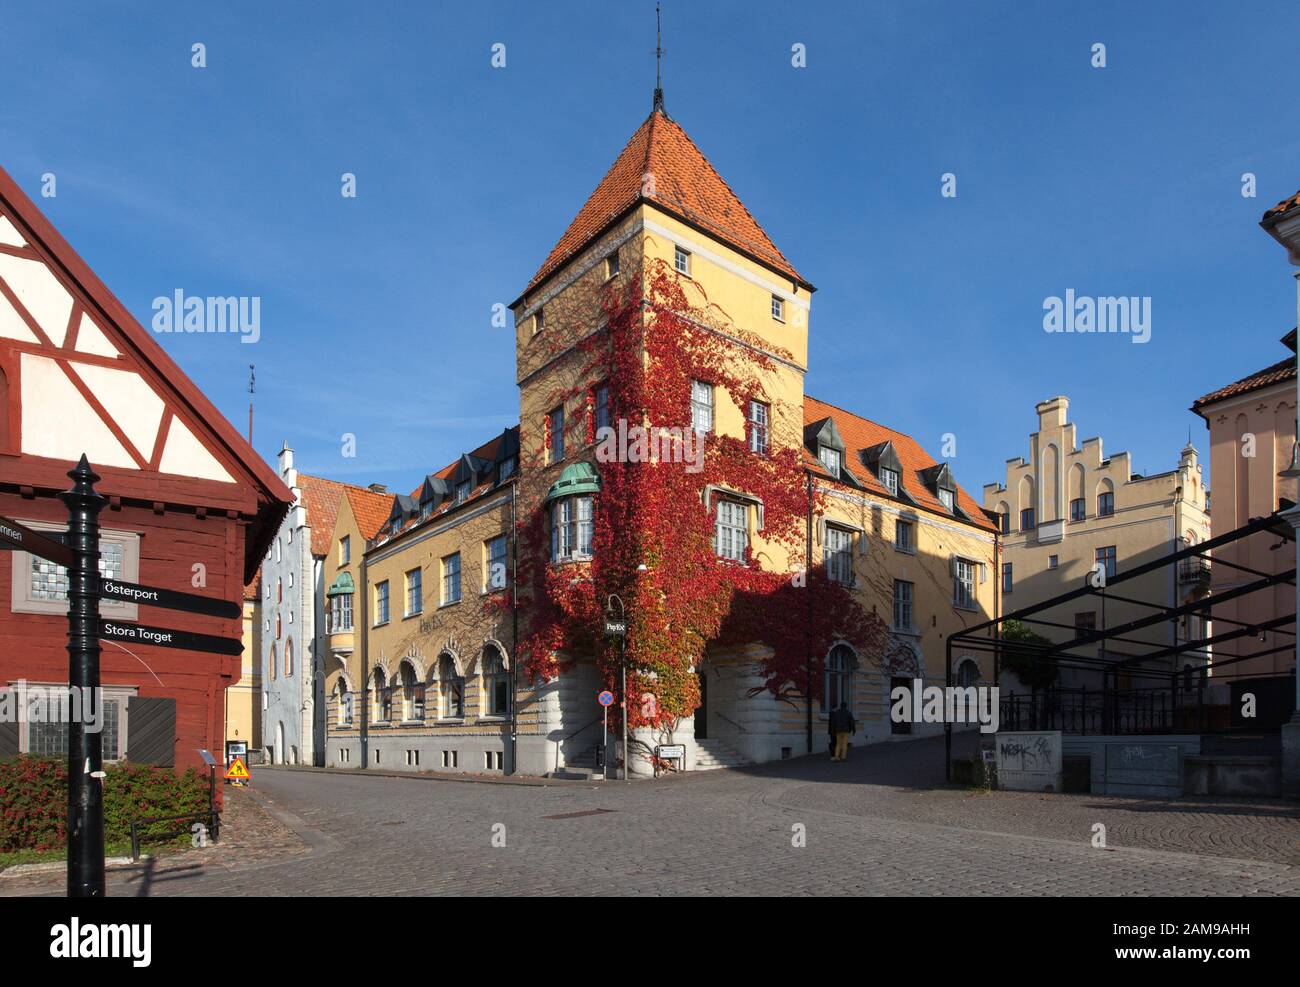 VISBY, SWEDEN ON OCTOBER 11, 2019. Street view of buildings. Old house, homes in the town. Unidentified folk. Editorial use. Stock Photo